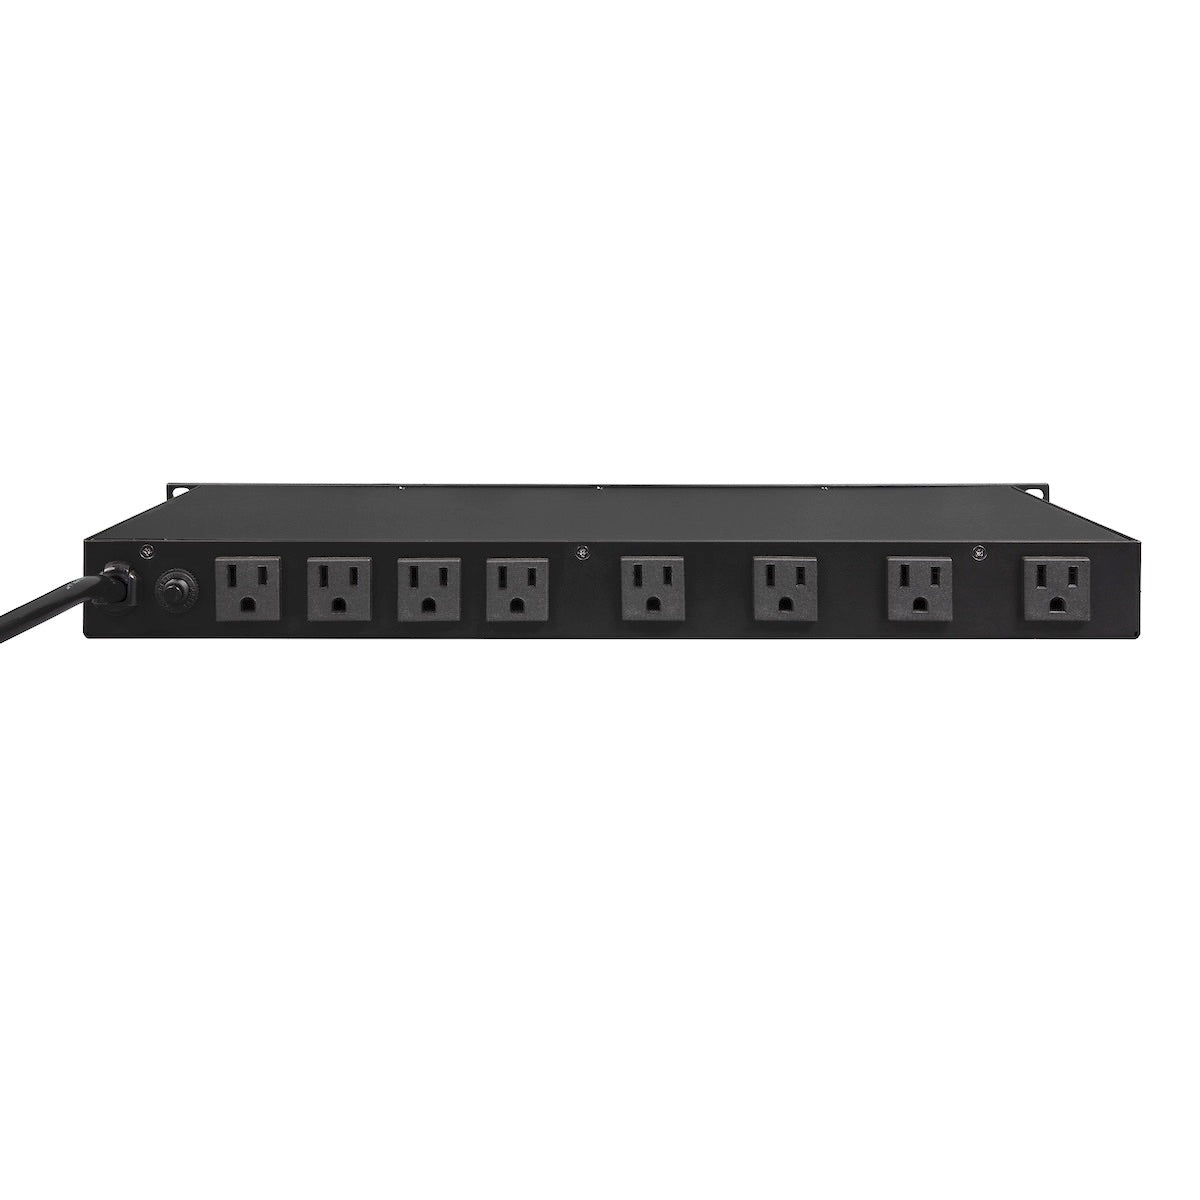 Radial Power-2 Rackmount Power Conditioner Surge Suppressor with LED Lighting, back